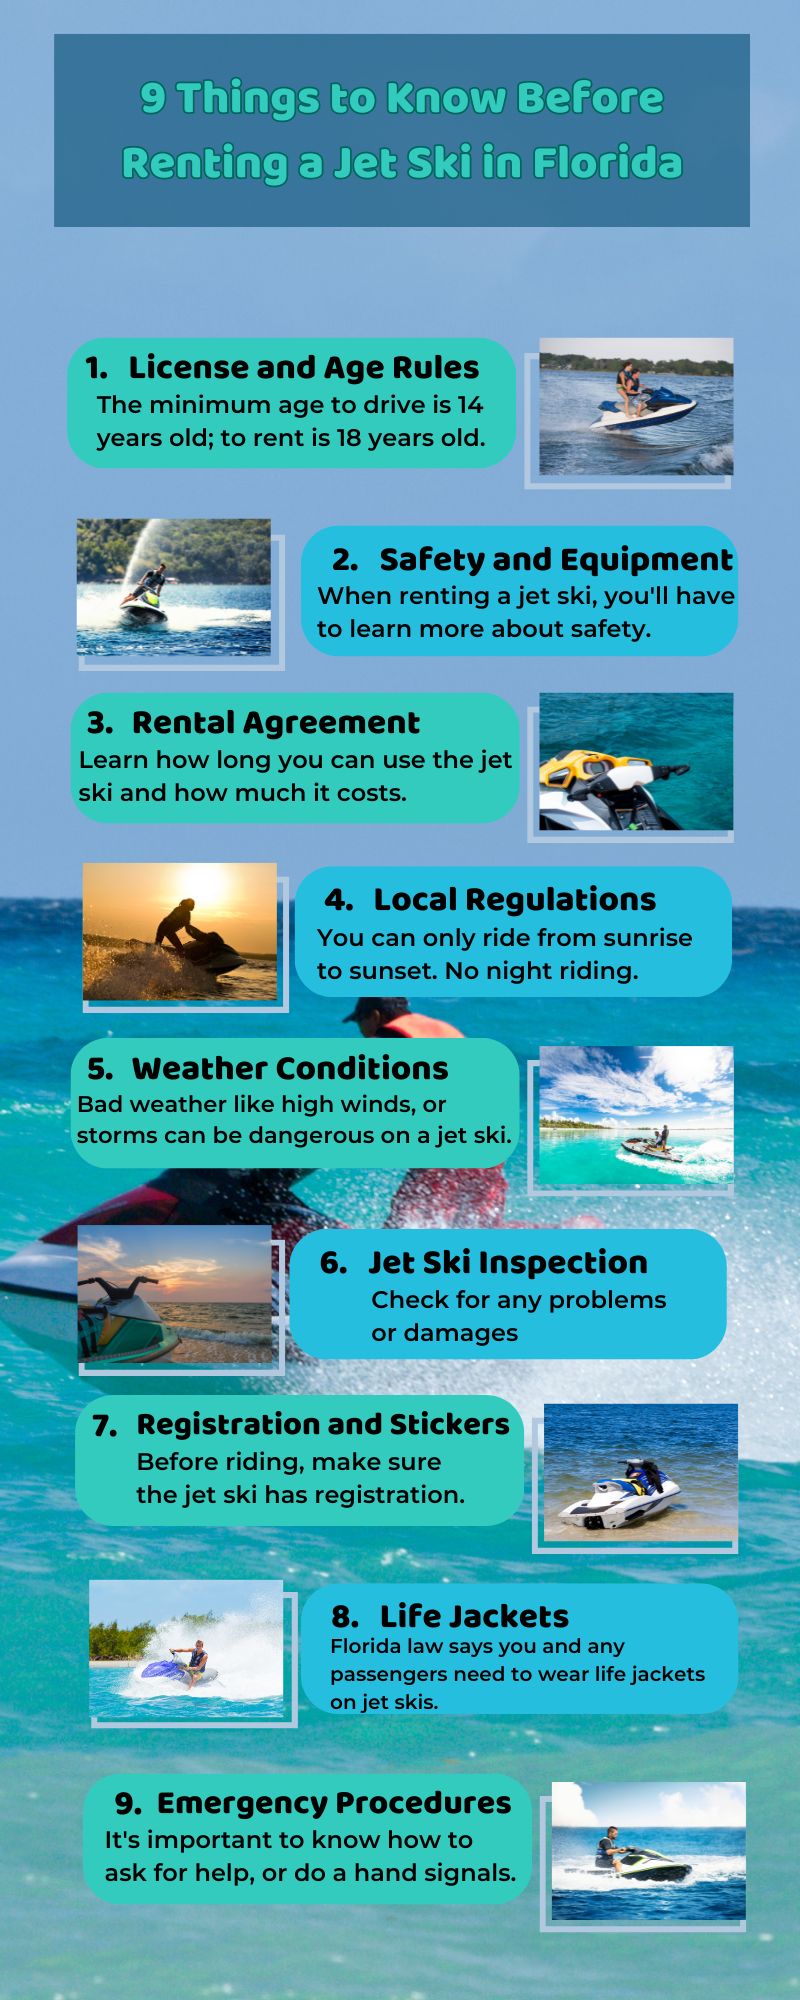 What to Know Before Renting Jet Ski in Florida